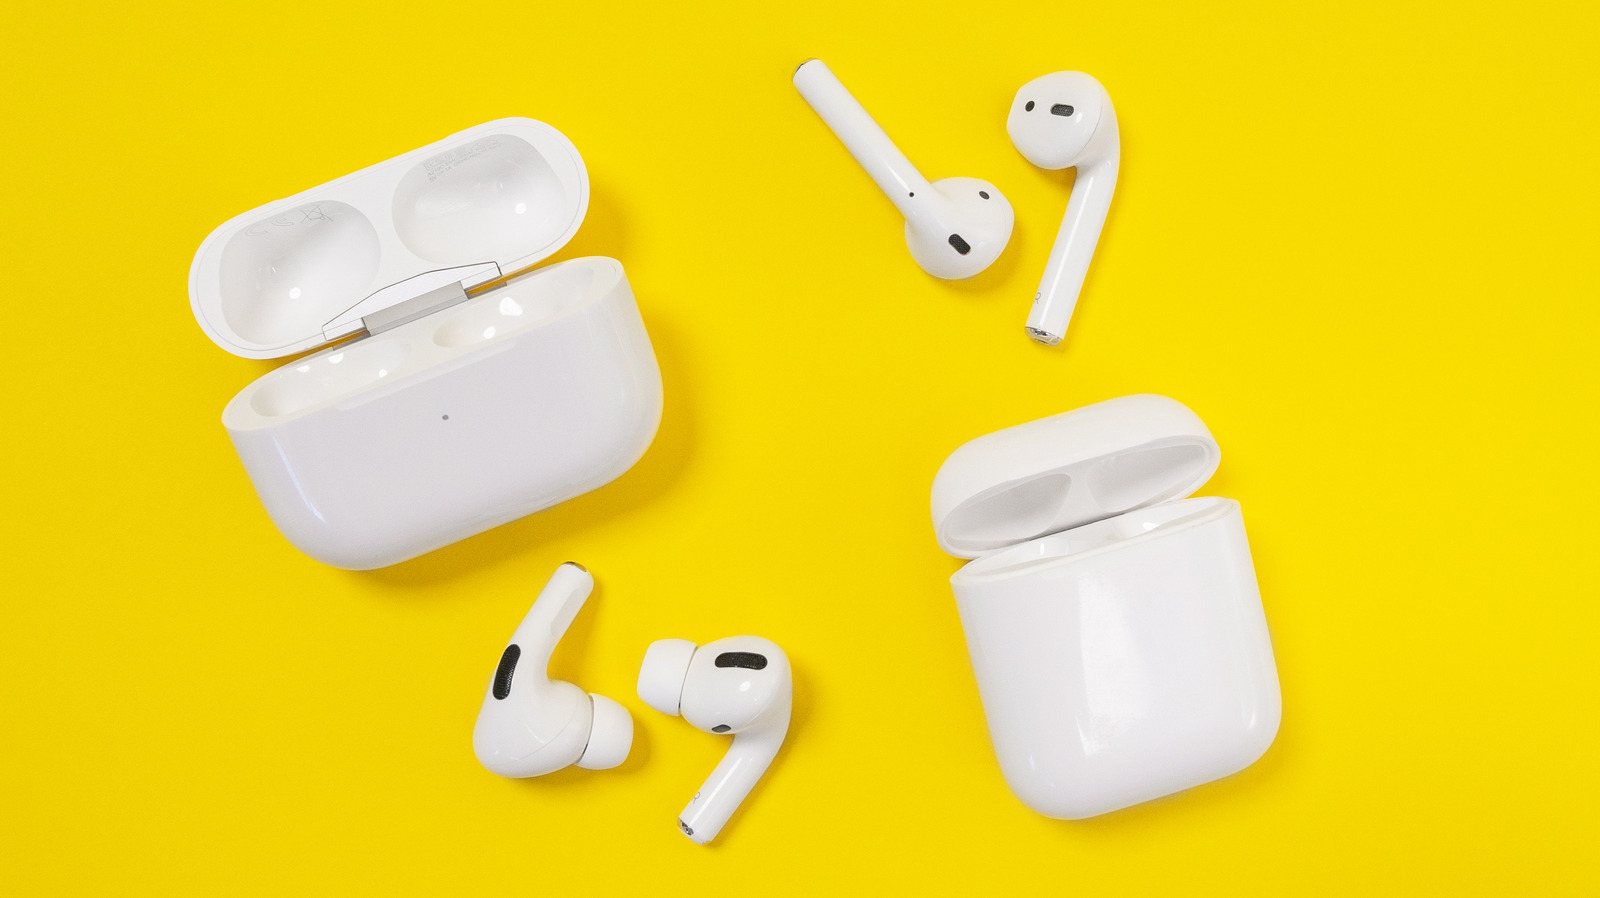 How to Tell If Your AirPods Are Fake